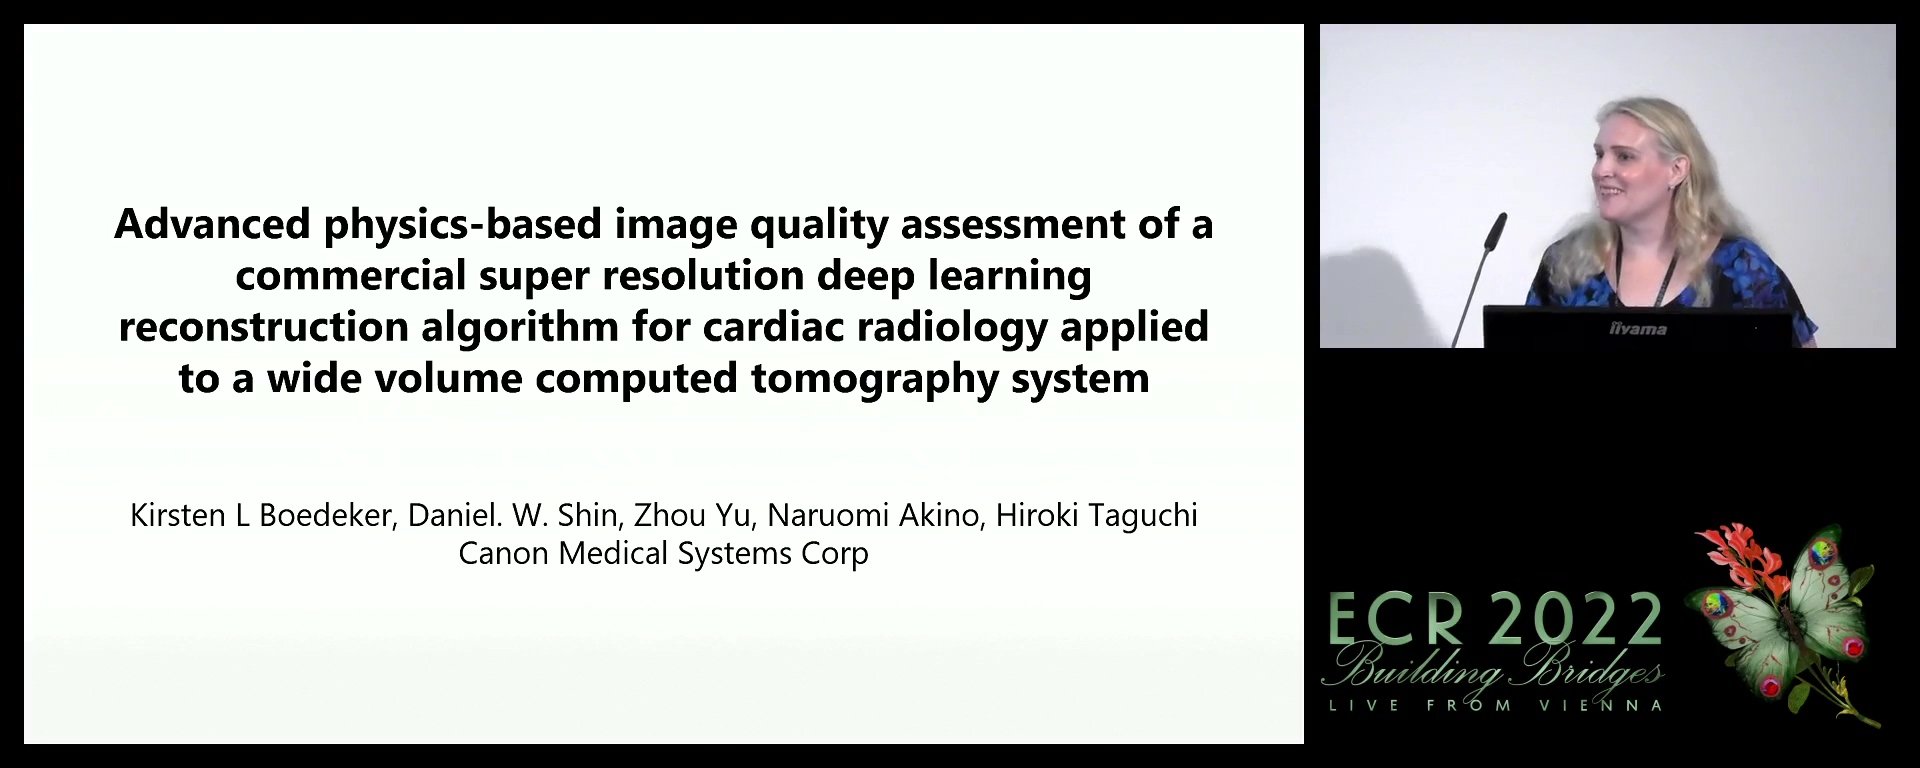 Advanced physics-based image quality assessment of a commercial super resolution deep learning reconstruction algorithm for cardiac radiology applied to a wide volume computed tomography system - Kirsten Boedeker, Los Angeles / US